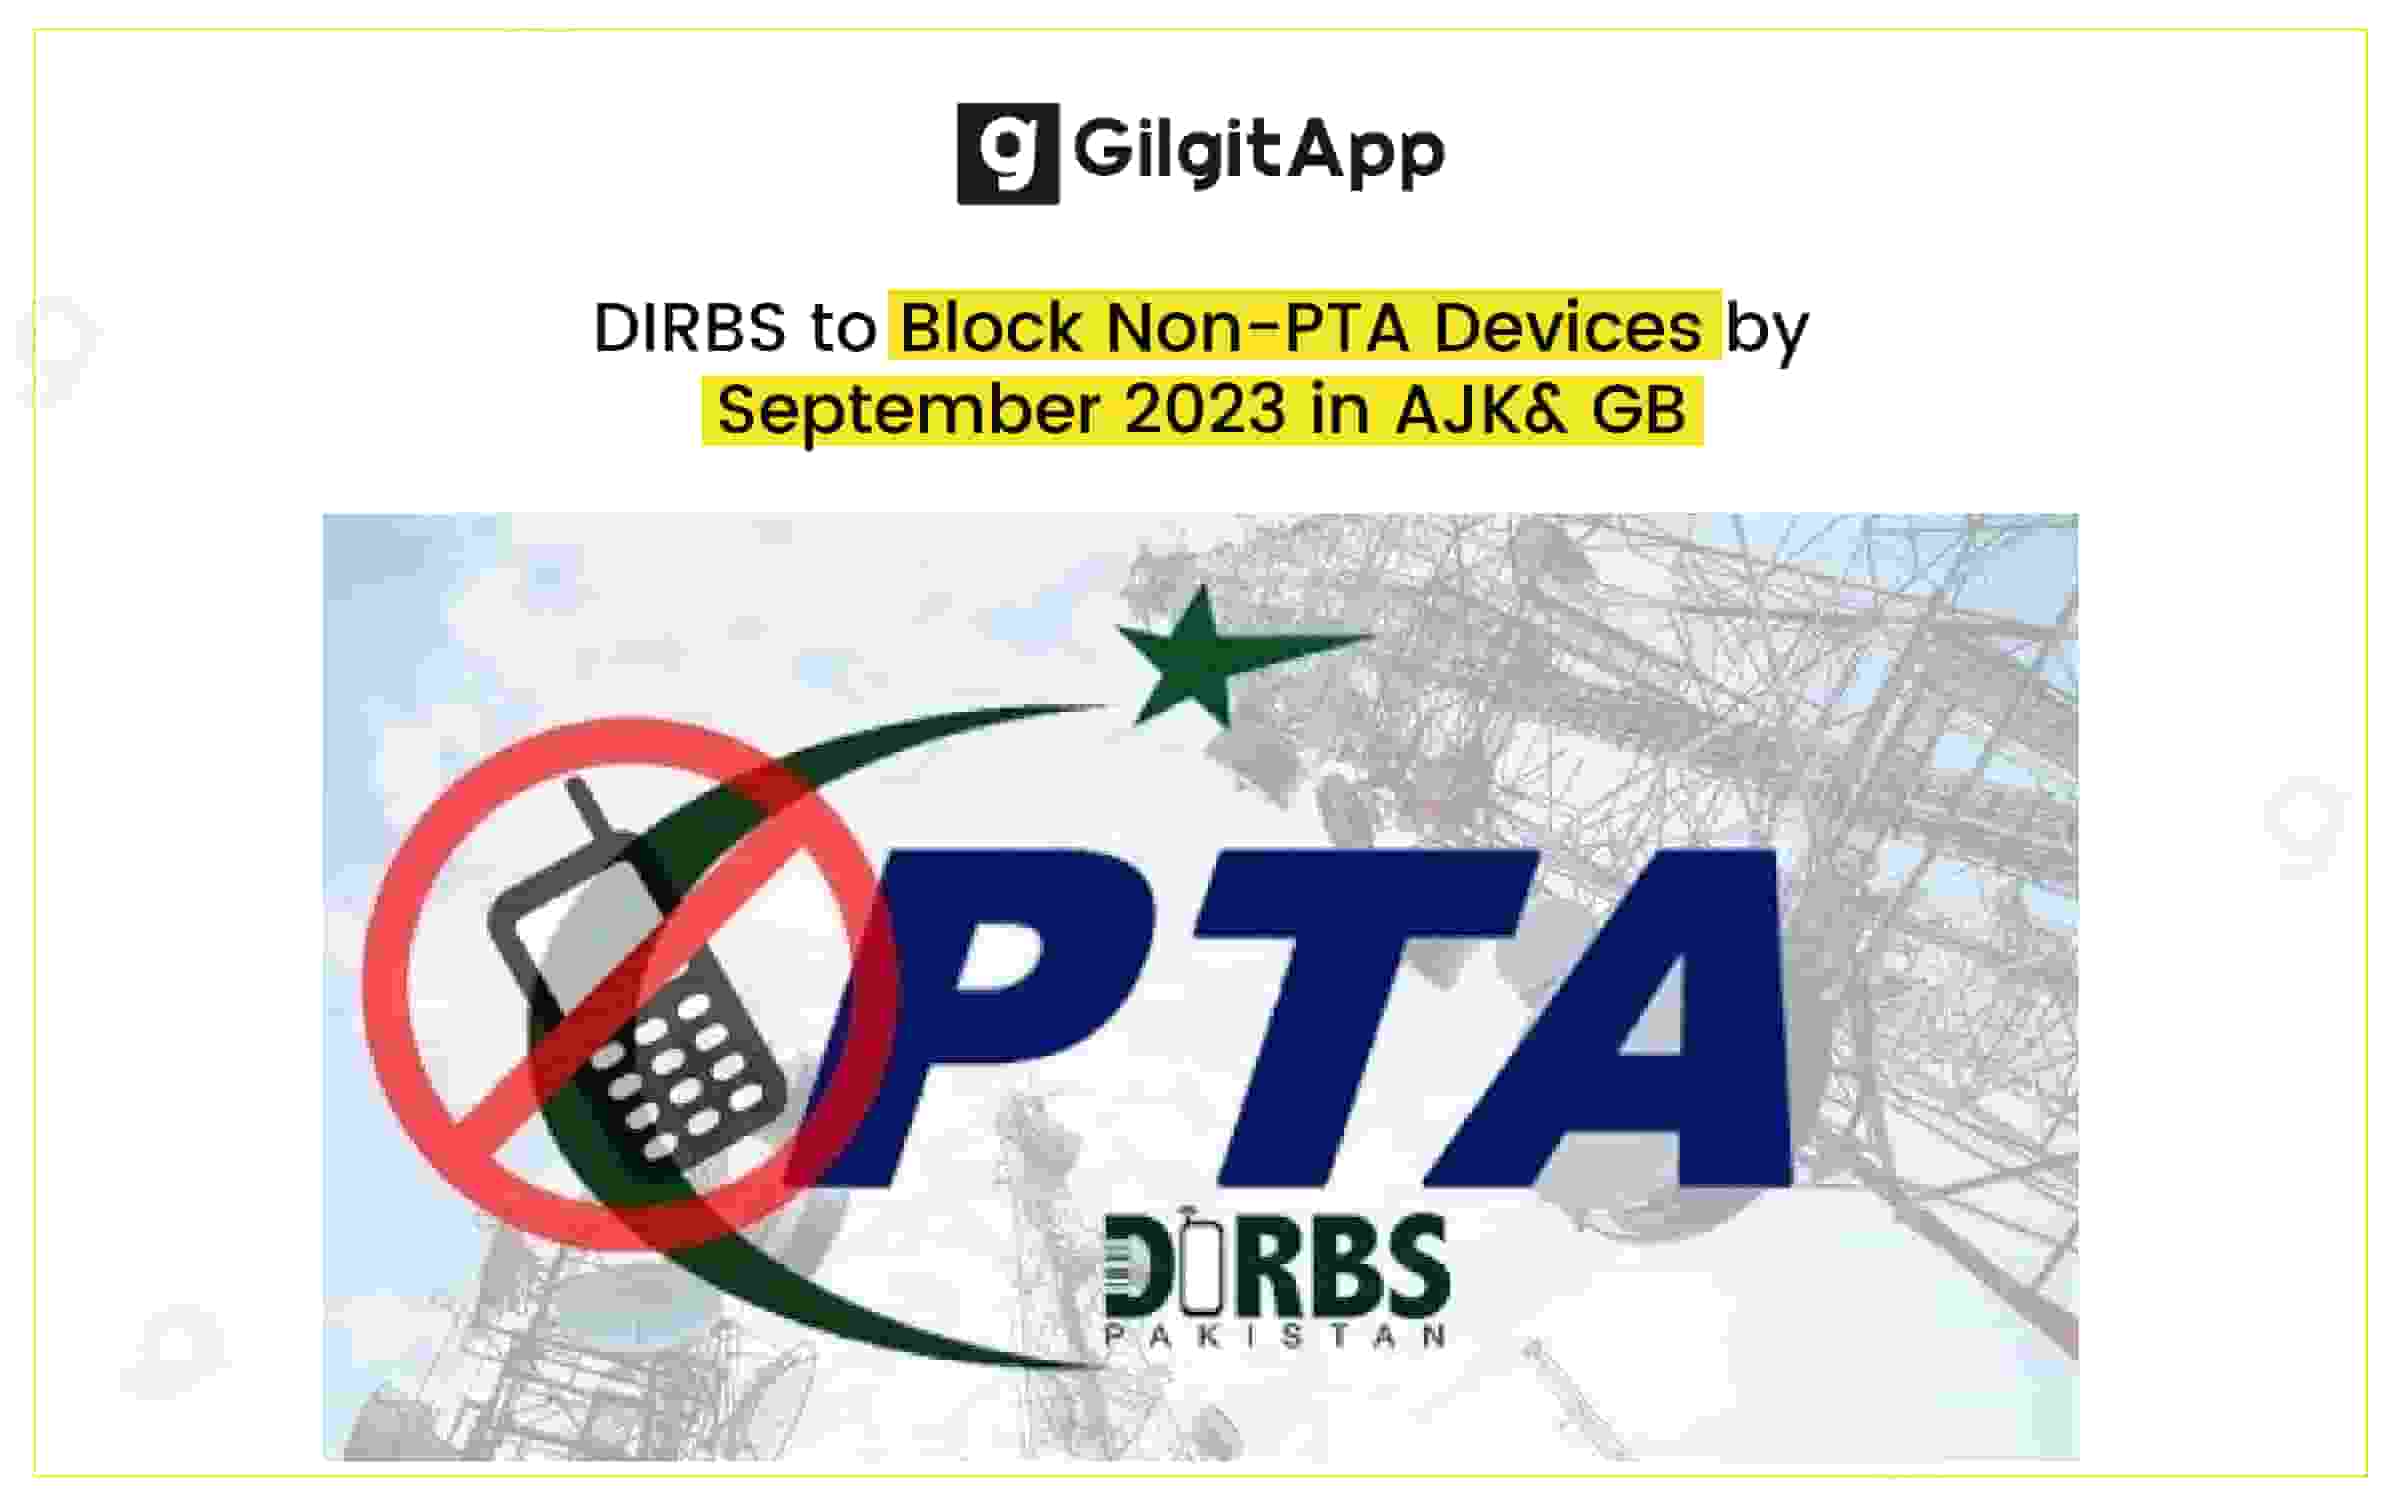 DIRBS to Block Non-PTA Devices by September 2023 in AJK & GB